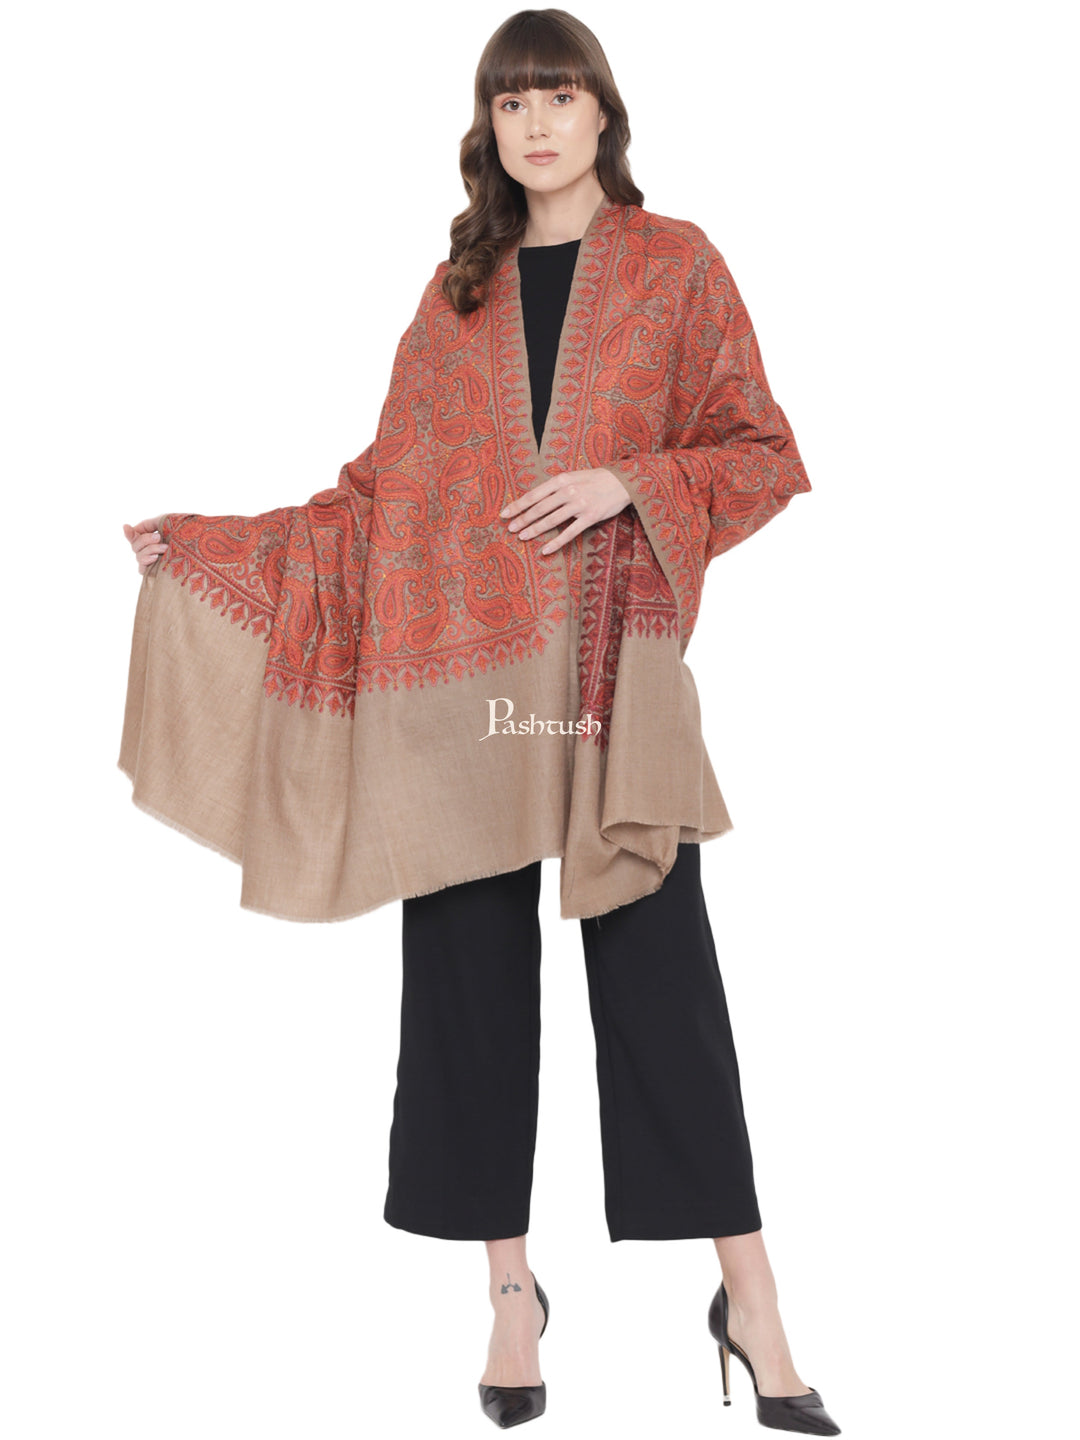 Pashtush Womens Embroidery Jaal Jamawar Shawl, Intricate Heritage Collection, Taupe